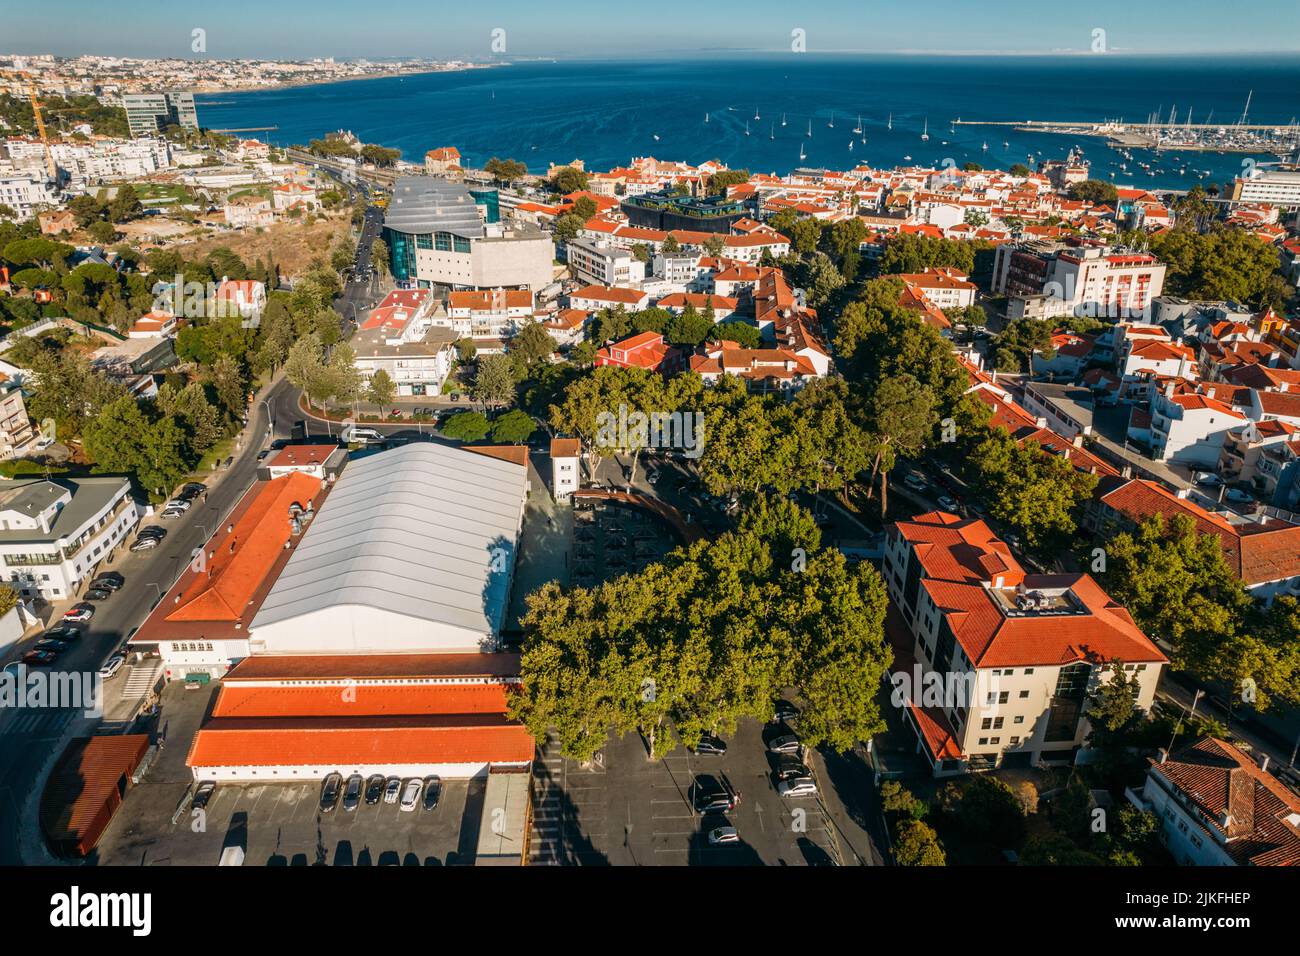 Aerial view of Cascais Market, also known as Mercado da Vila in Cascais, Portugal with the Bay visible in the background Stock Photo